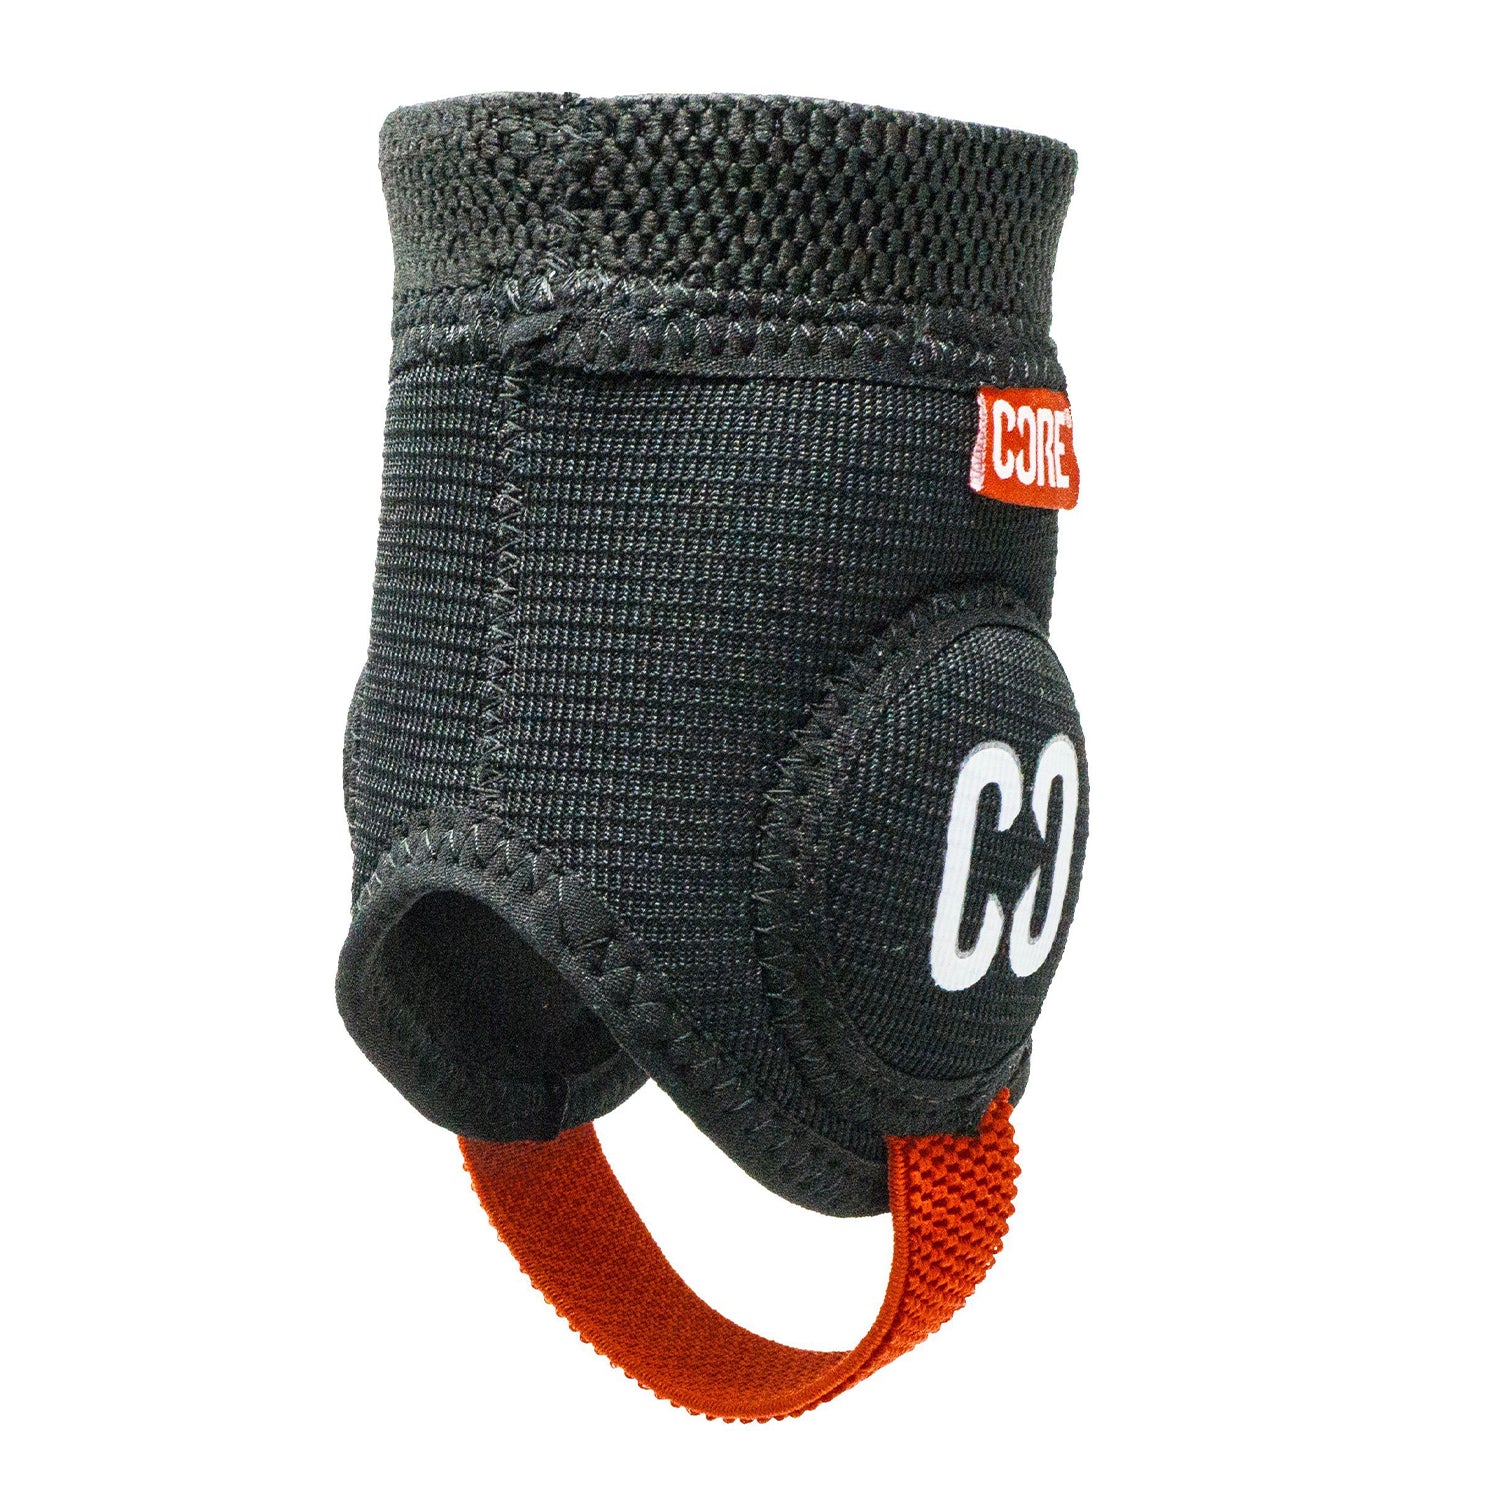 CORE Protection Ankle Guard - Prime Delux Store